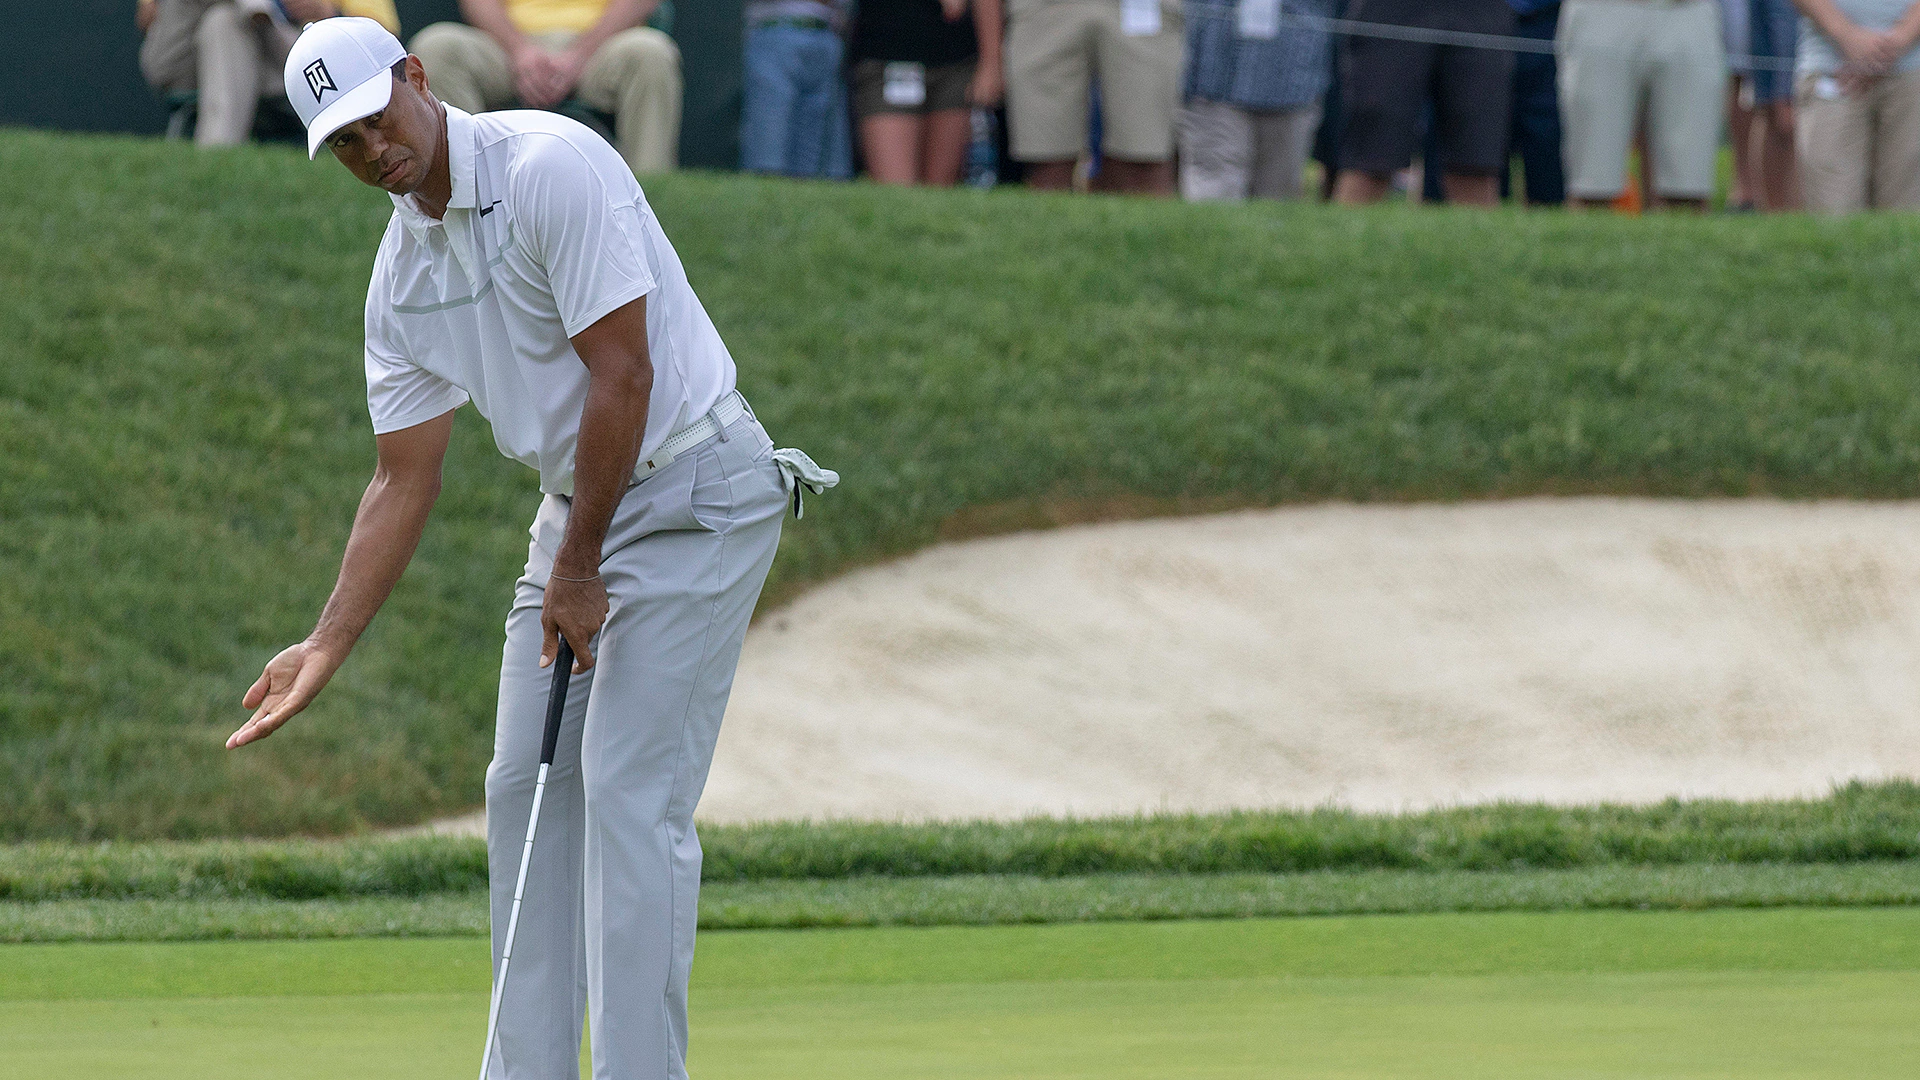 Watch: Woods struggles early, rallies late at Memorial